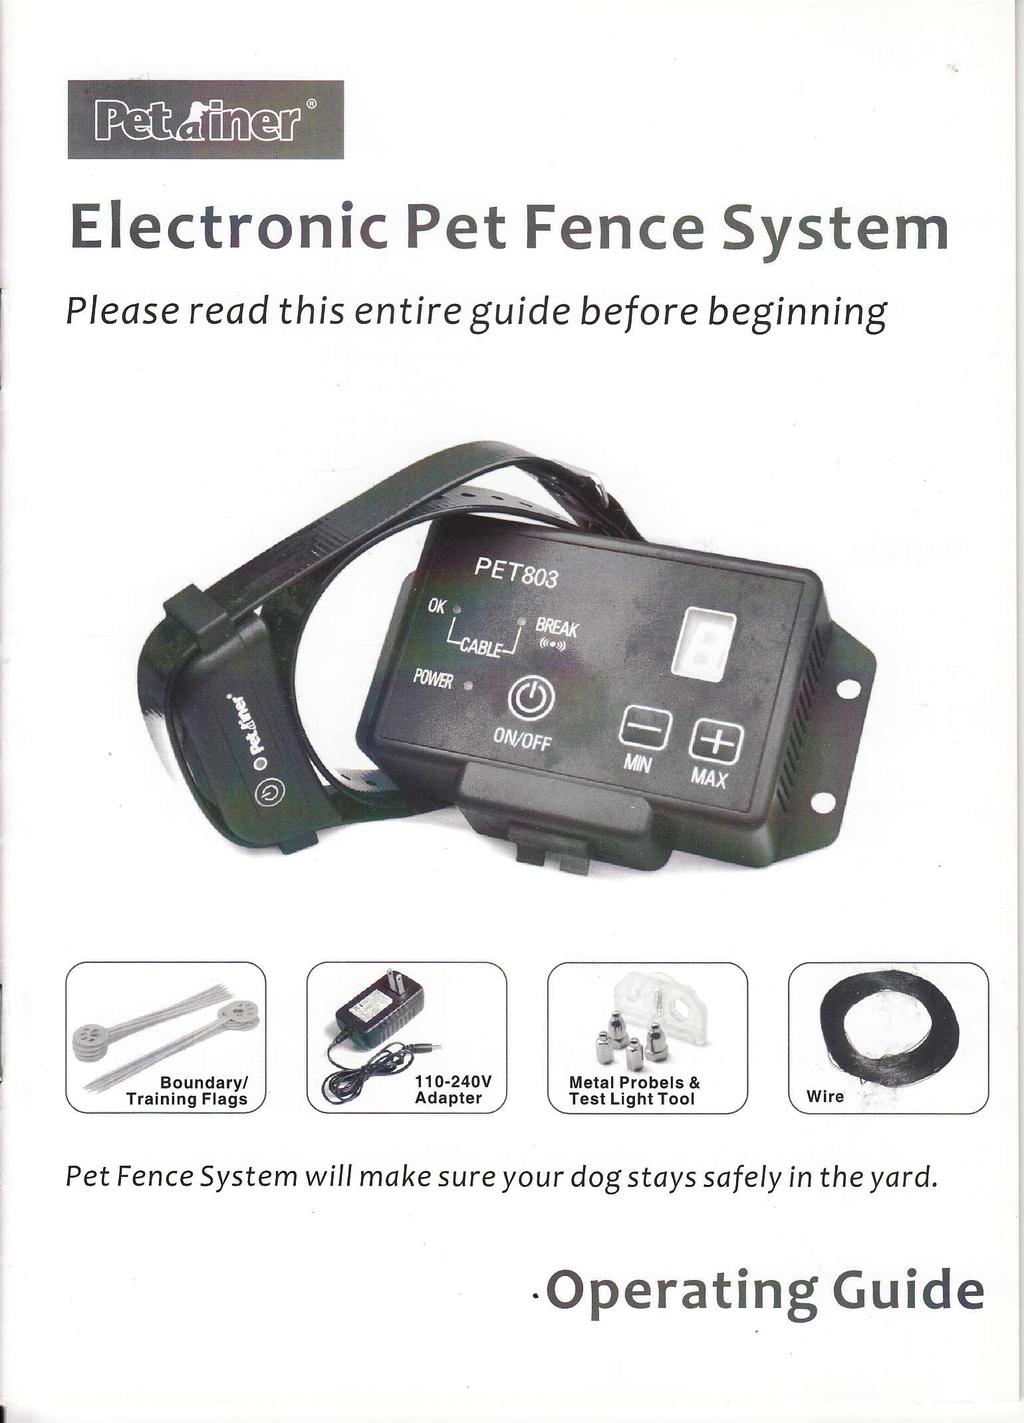 Electronic Pet Fence System Please read this entire guide bef ore beginning.@boundary/ Training Flags, % I G_- ll.rl :.